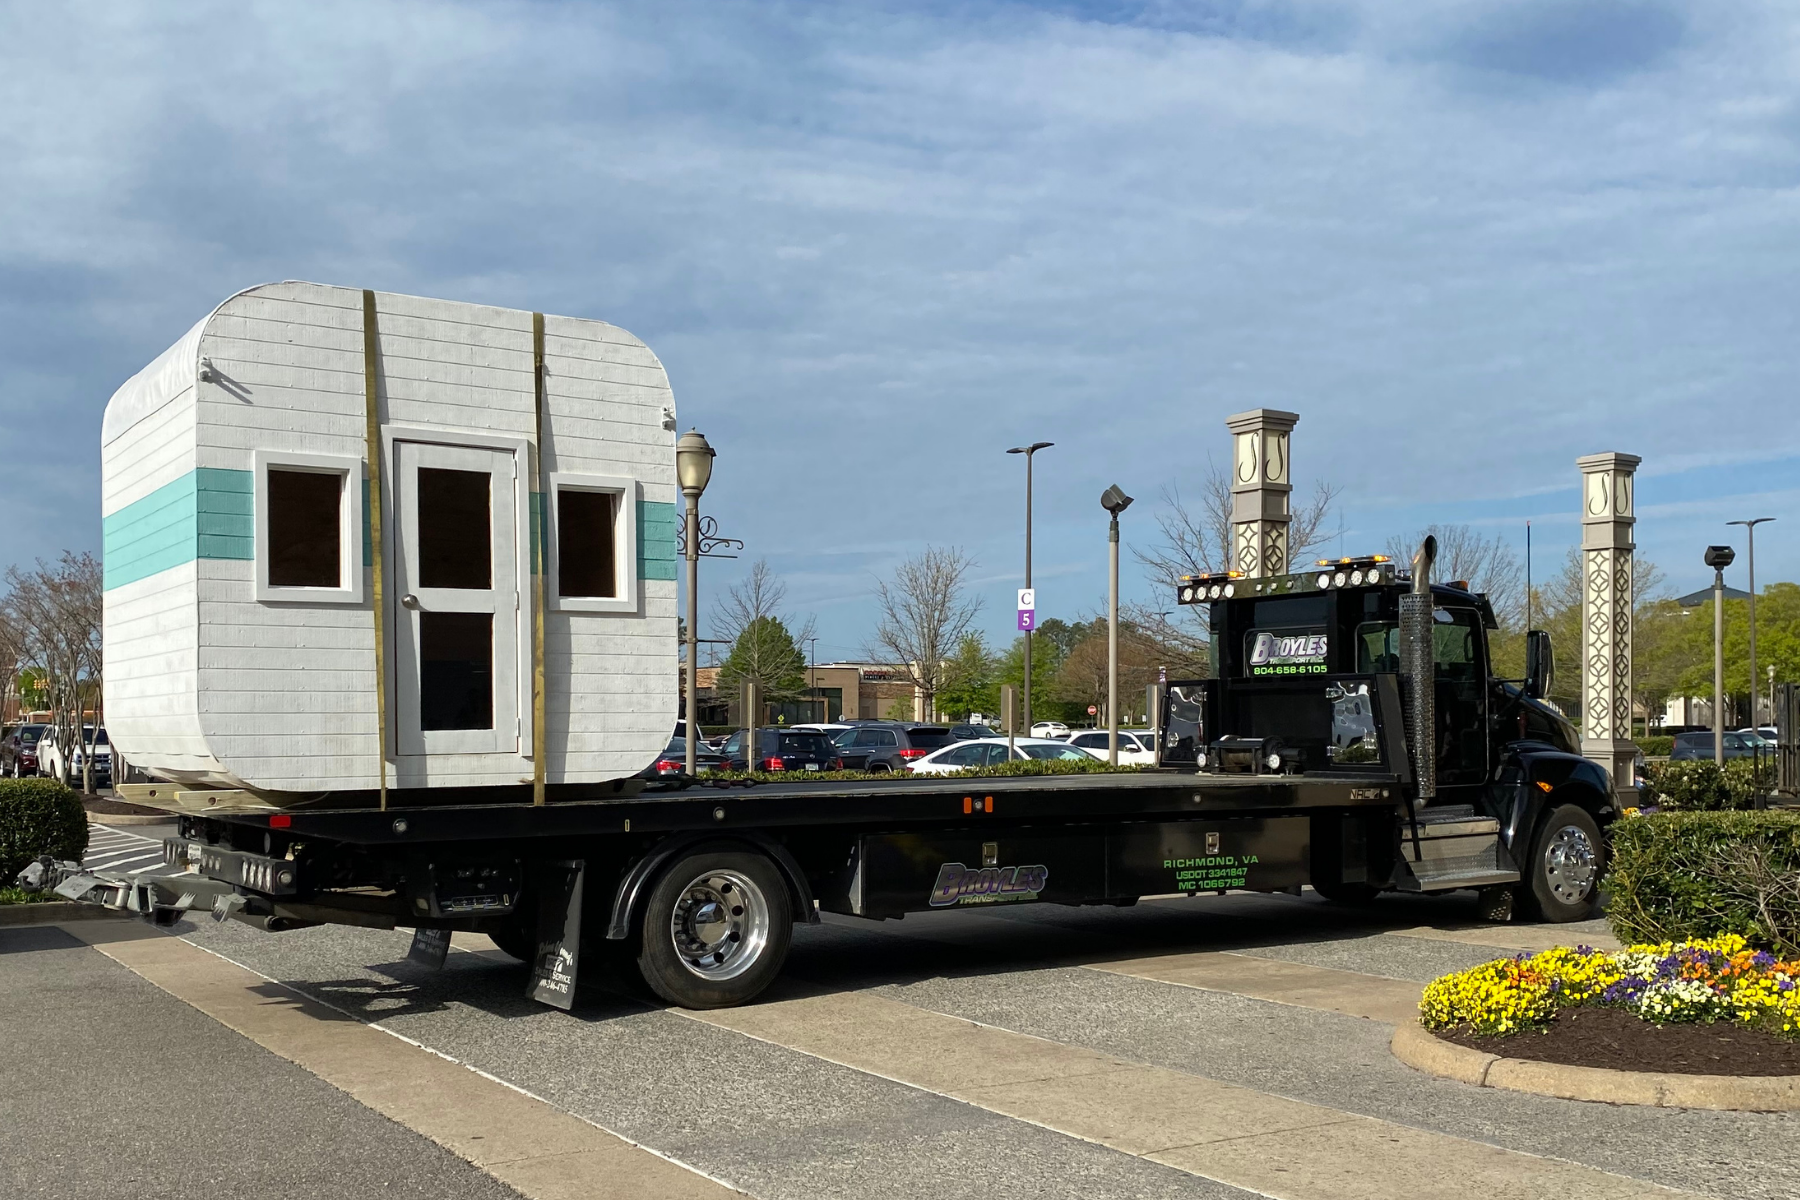 wmj mini camper playhouse being delivered